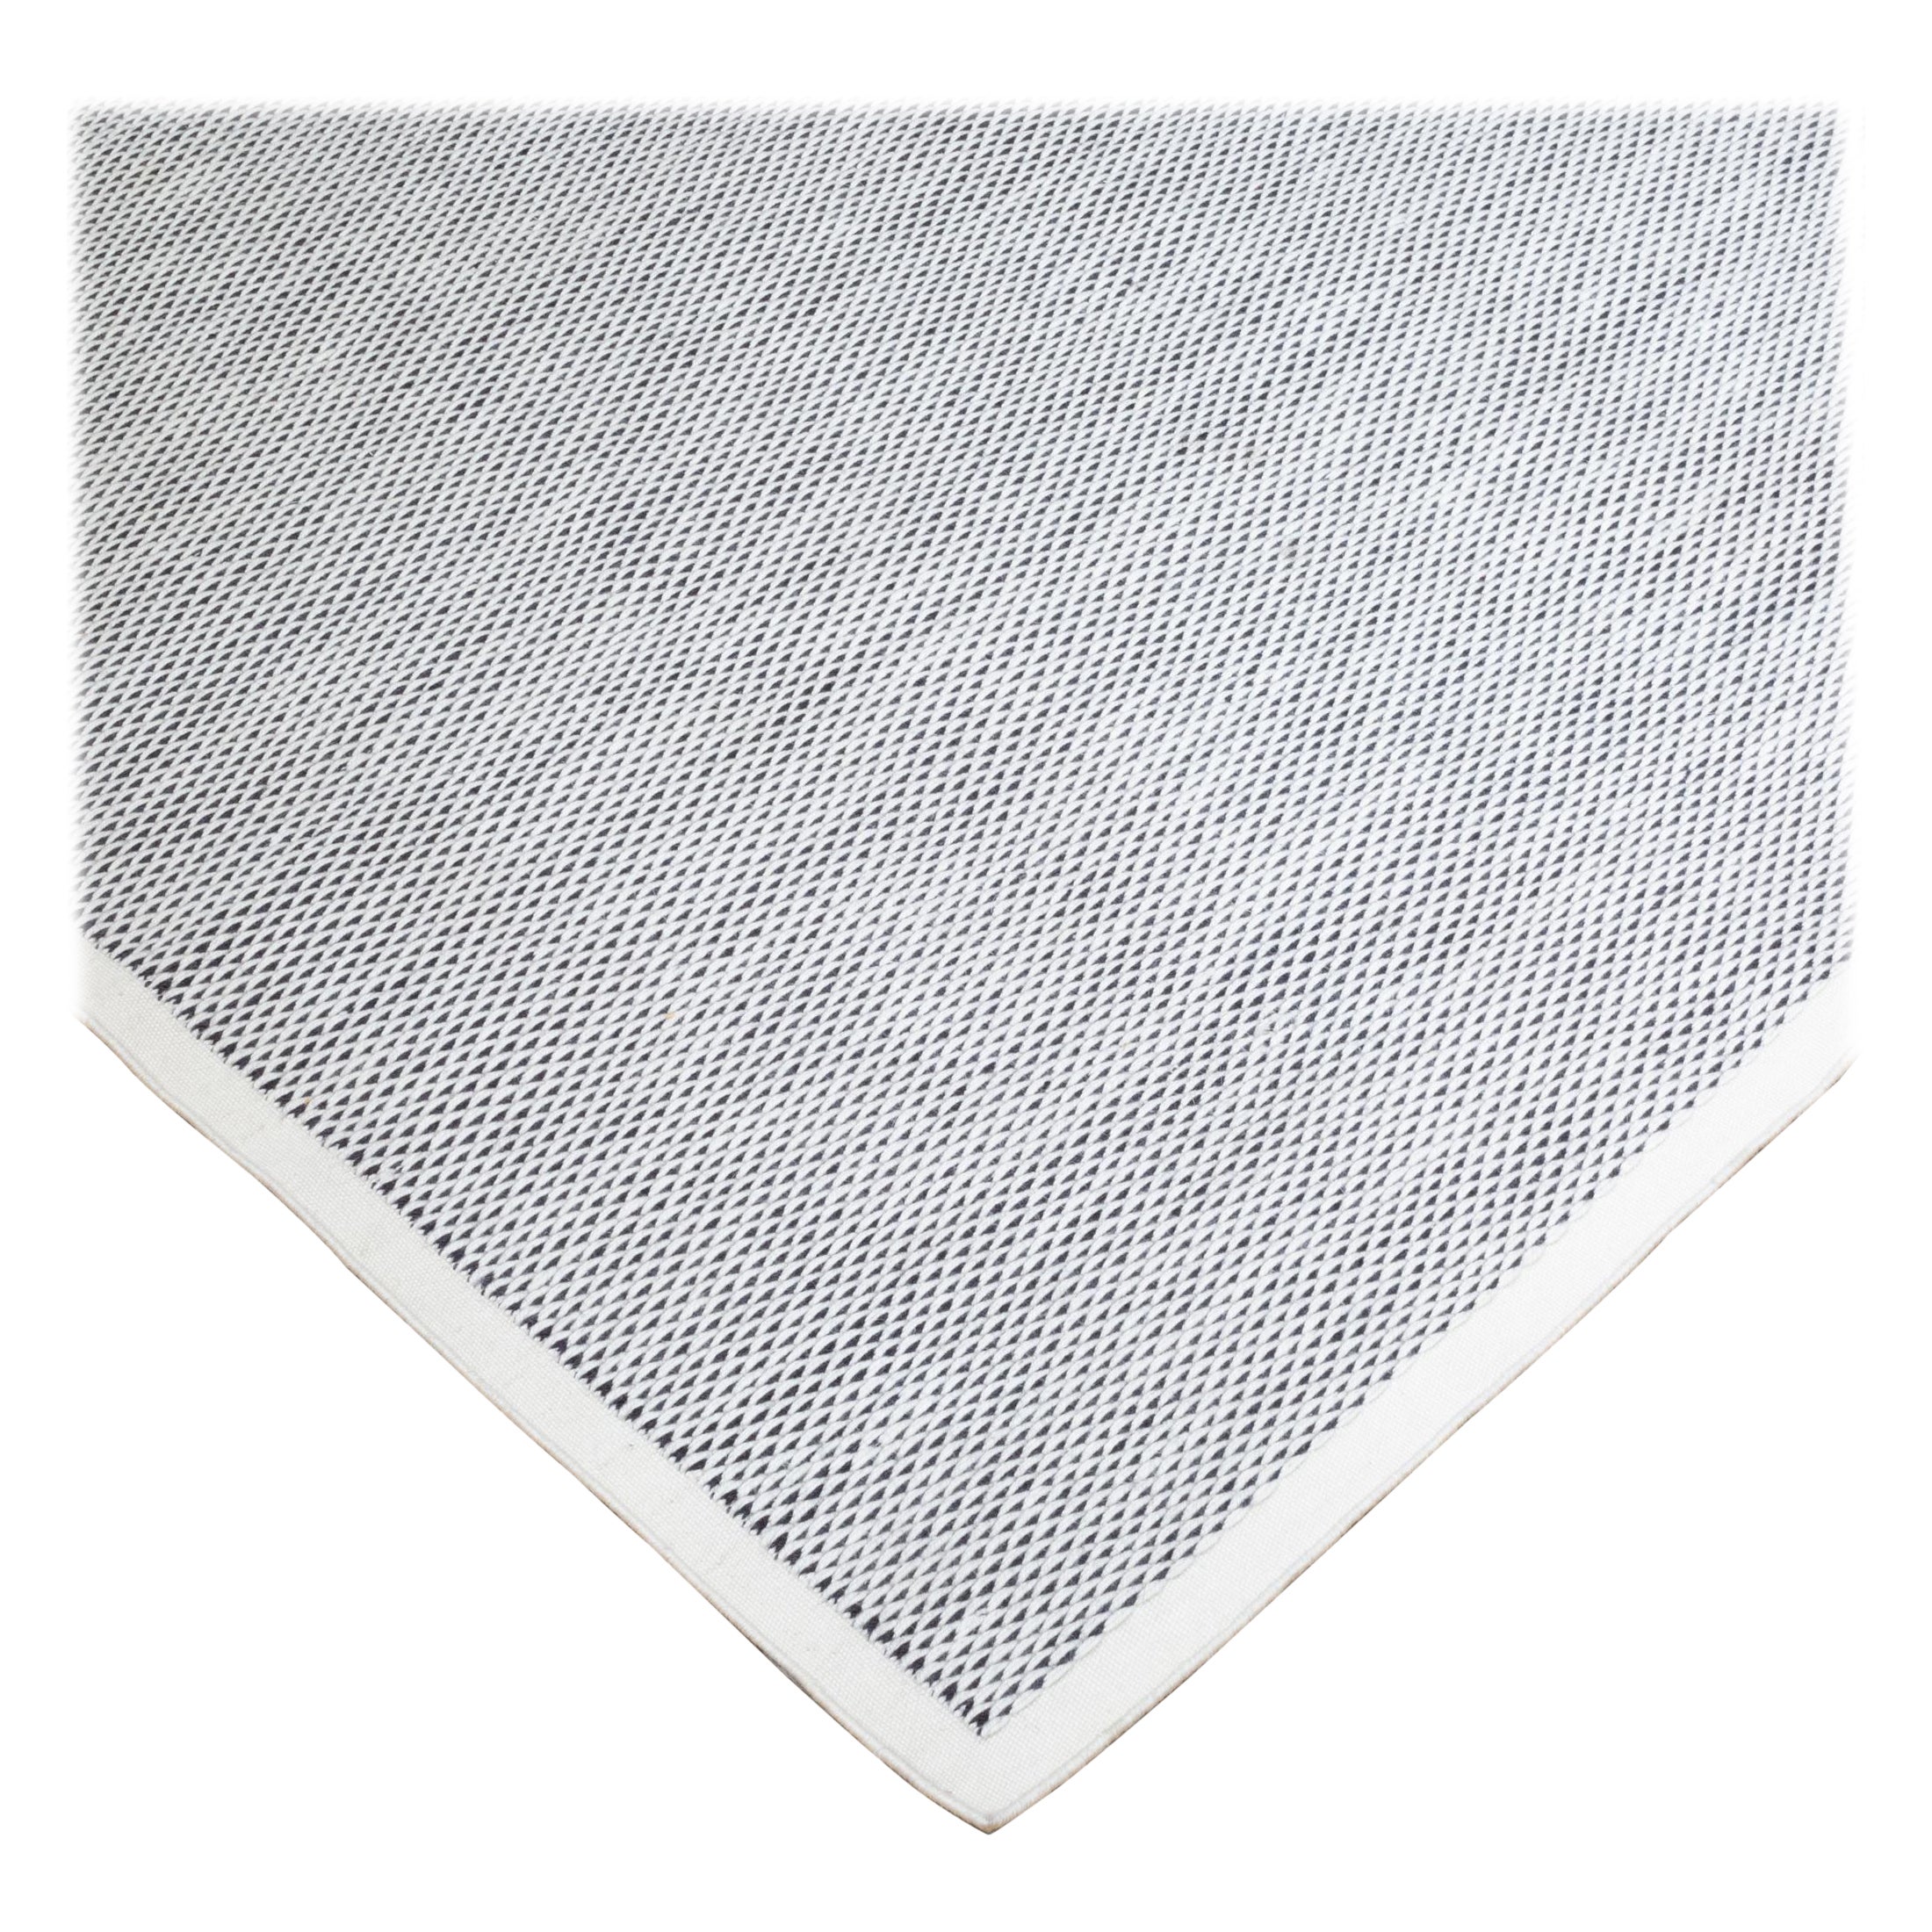 100% Merino Wool Lyxx Area Rug by Fells Andes